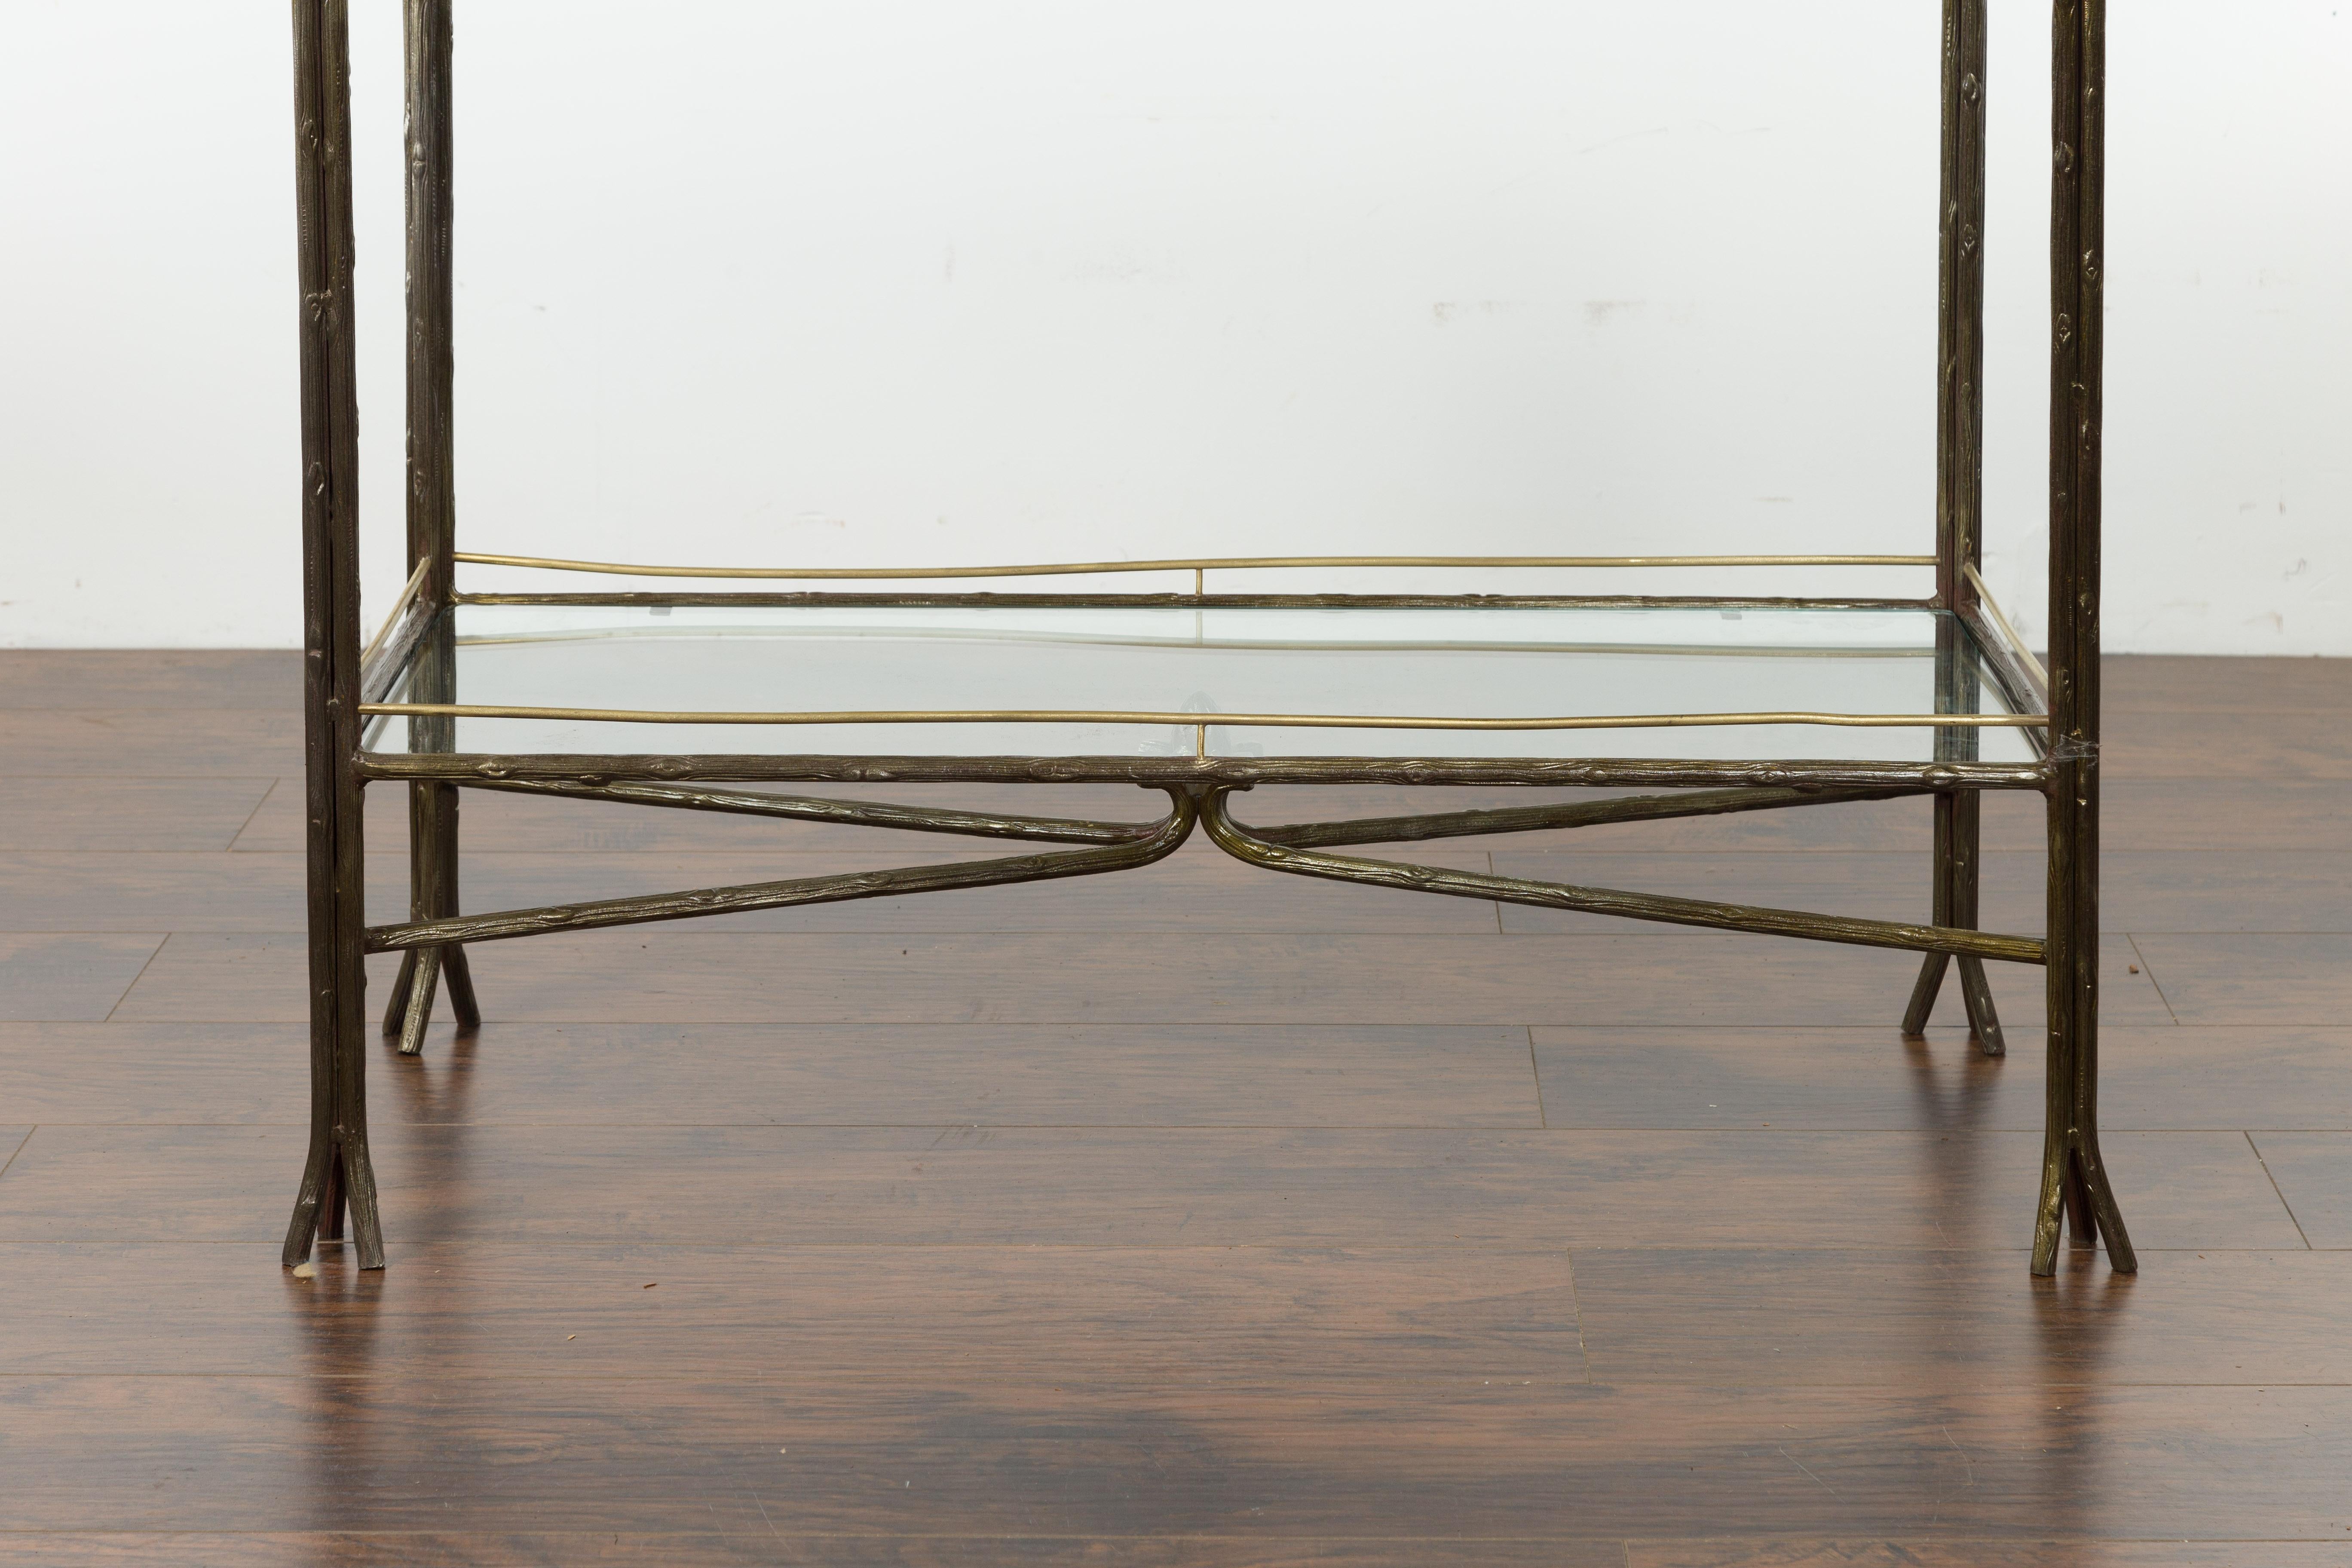 20th Century Midcentury Italian Steel and Brass Faux Bois Table with Glass Top and Shelf For Sale